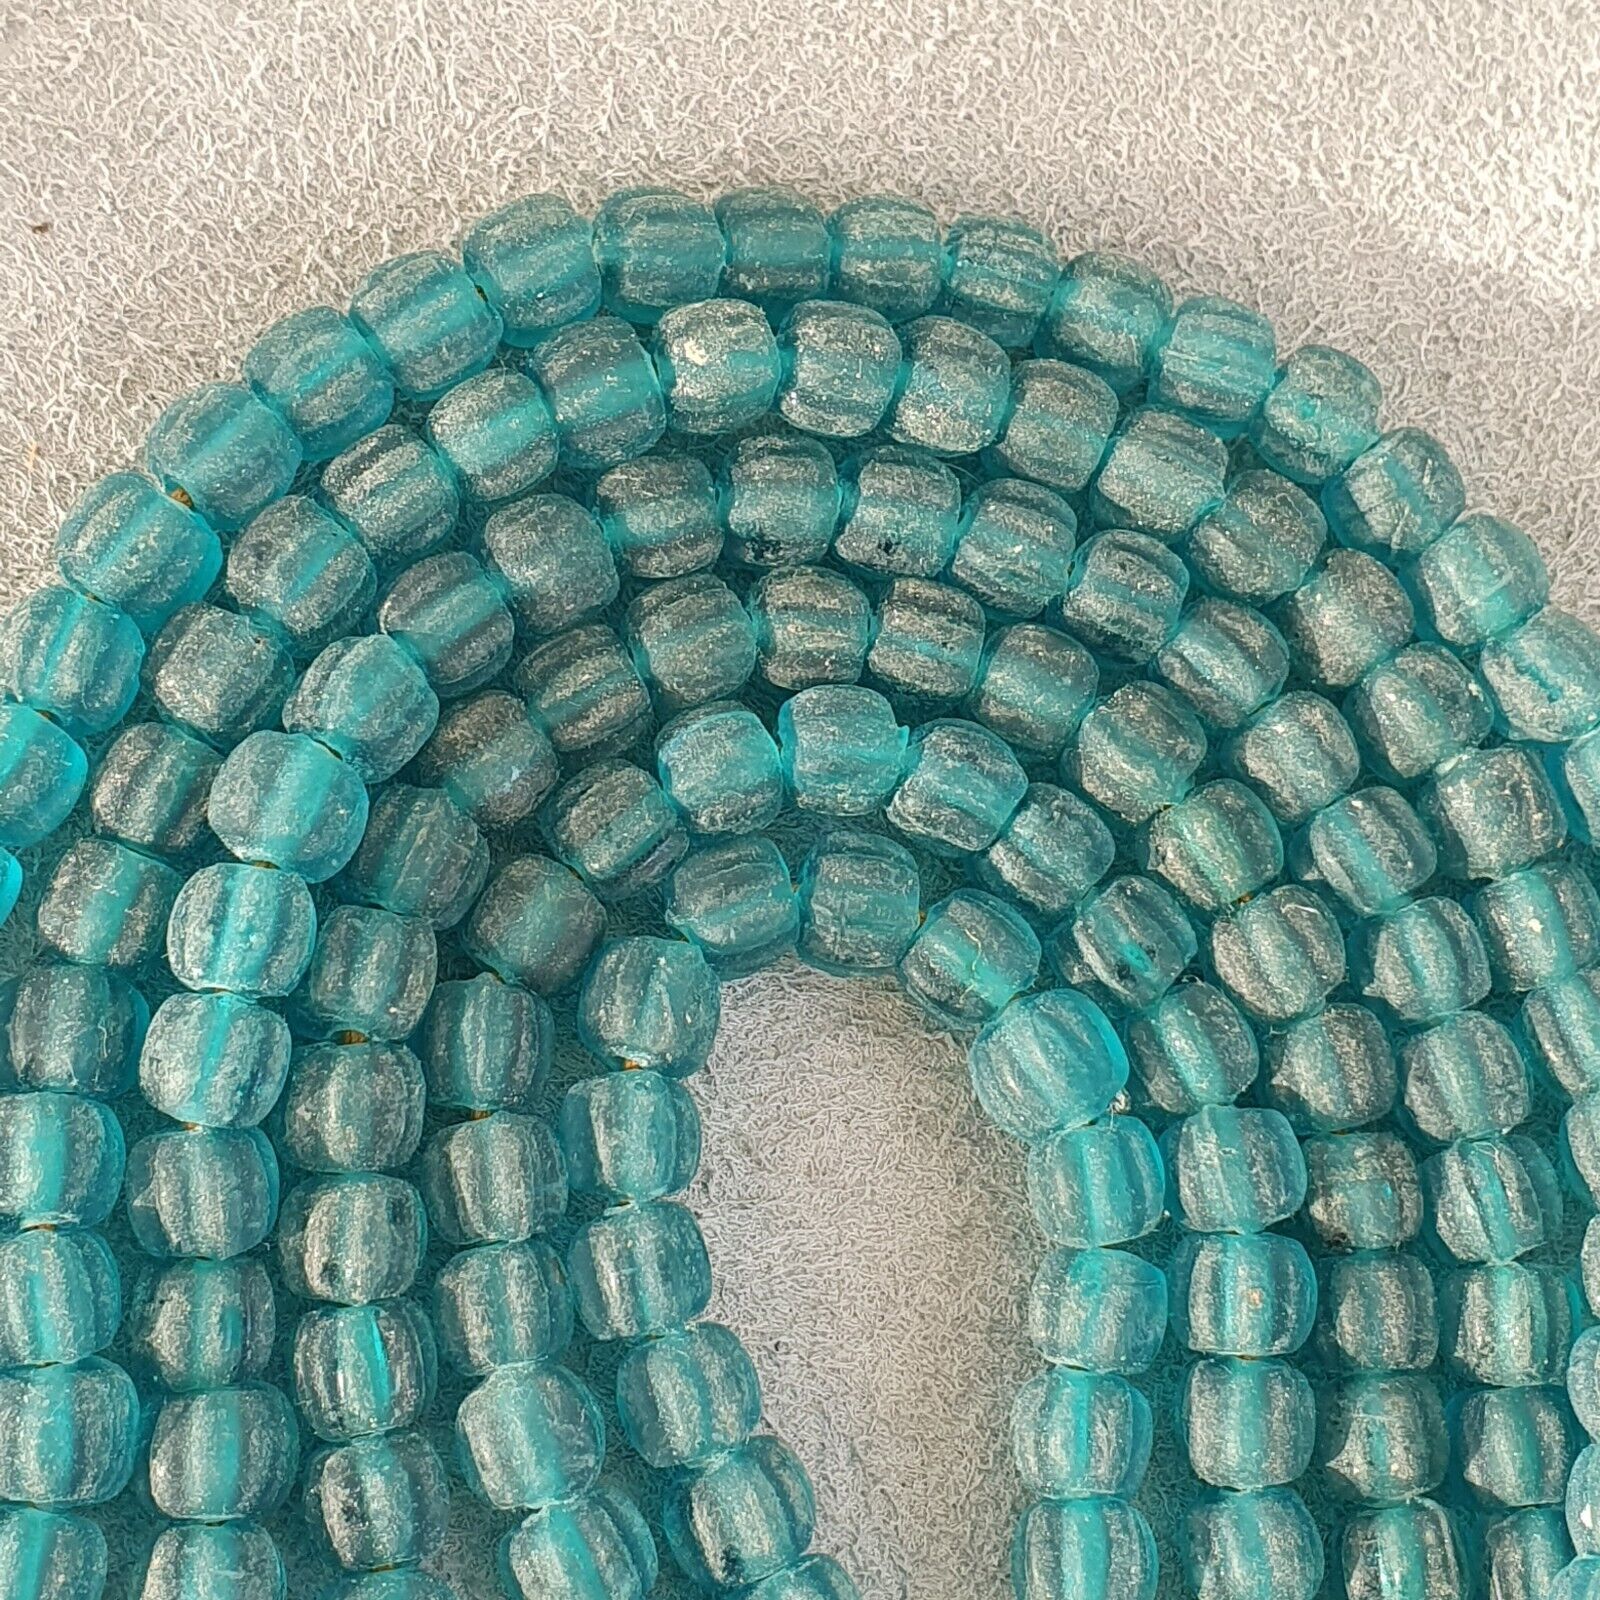 BEAUTIFUL OLD AFRICAN greenish blue GLASS ANTIQUE Style BEADS 7MM